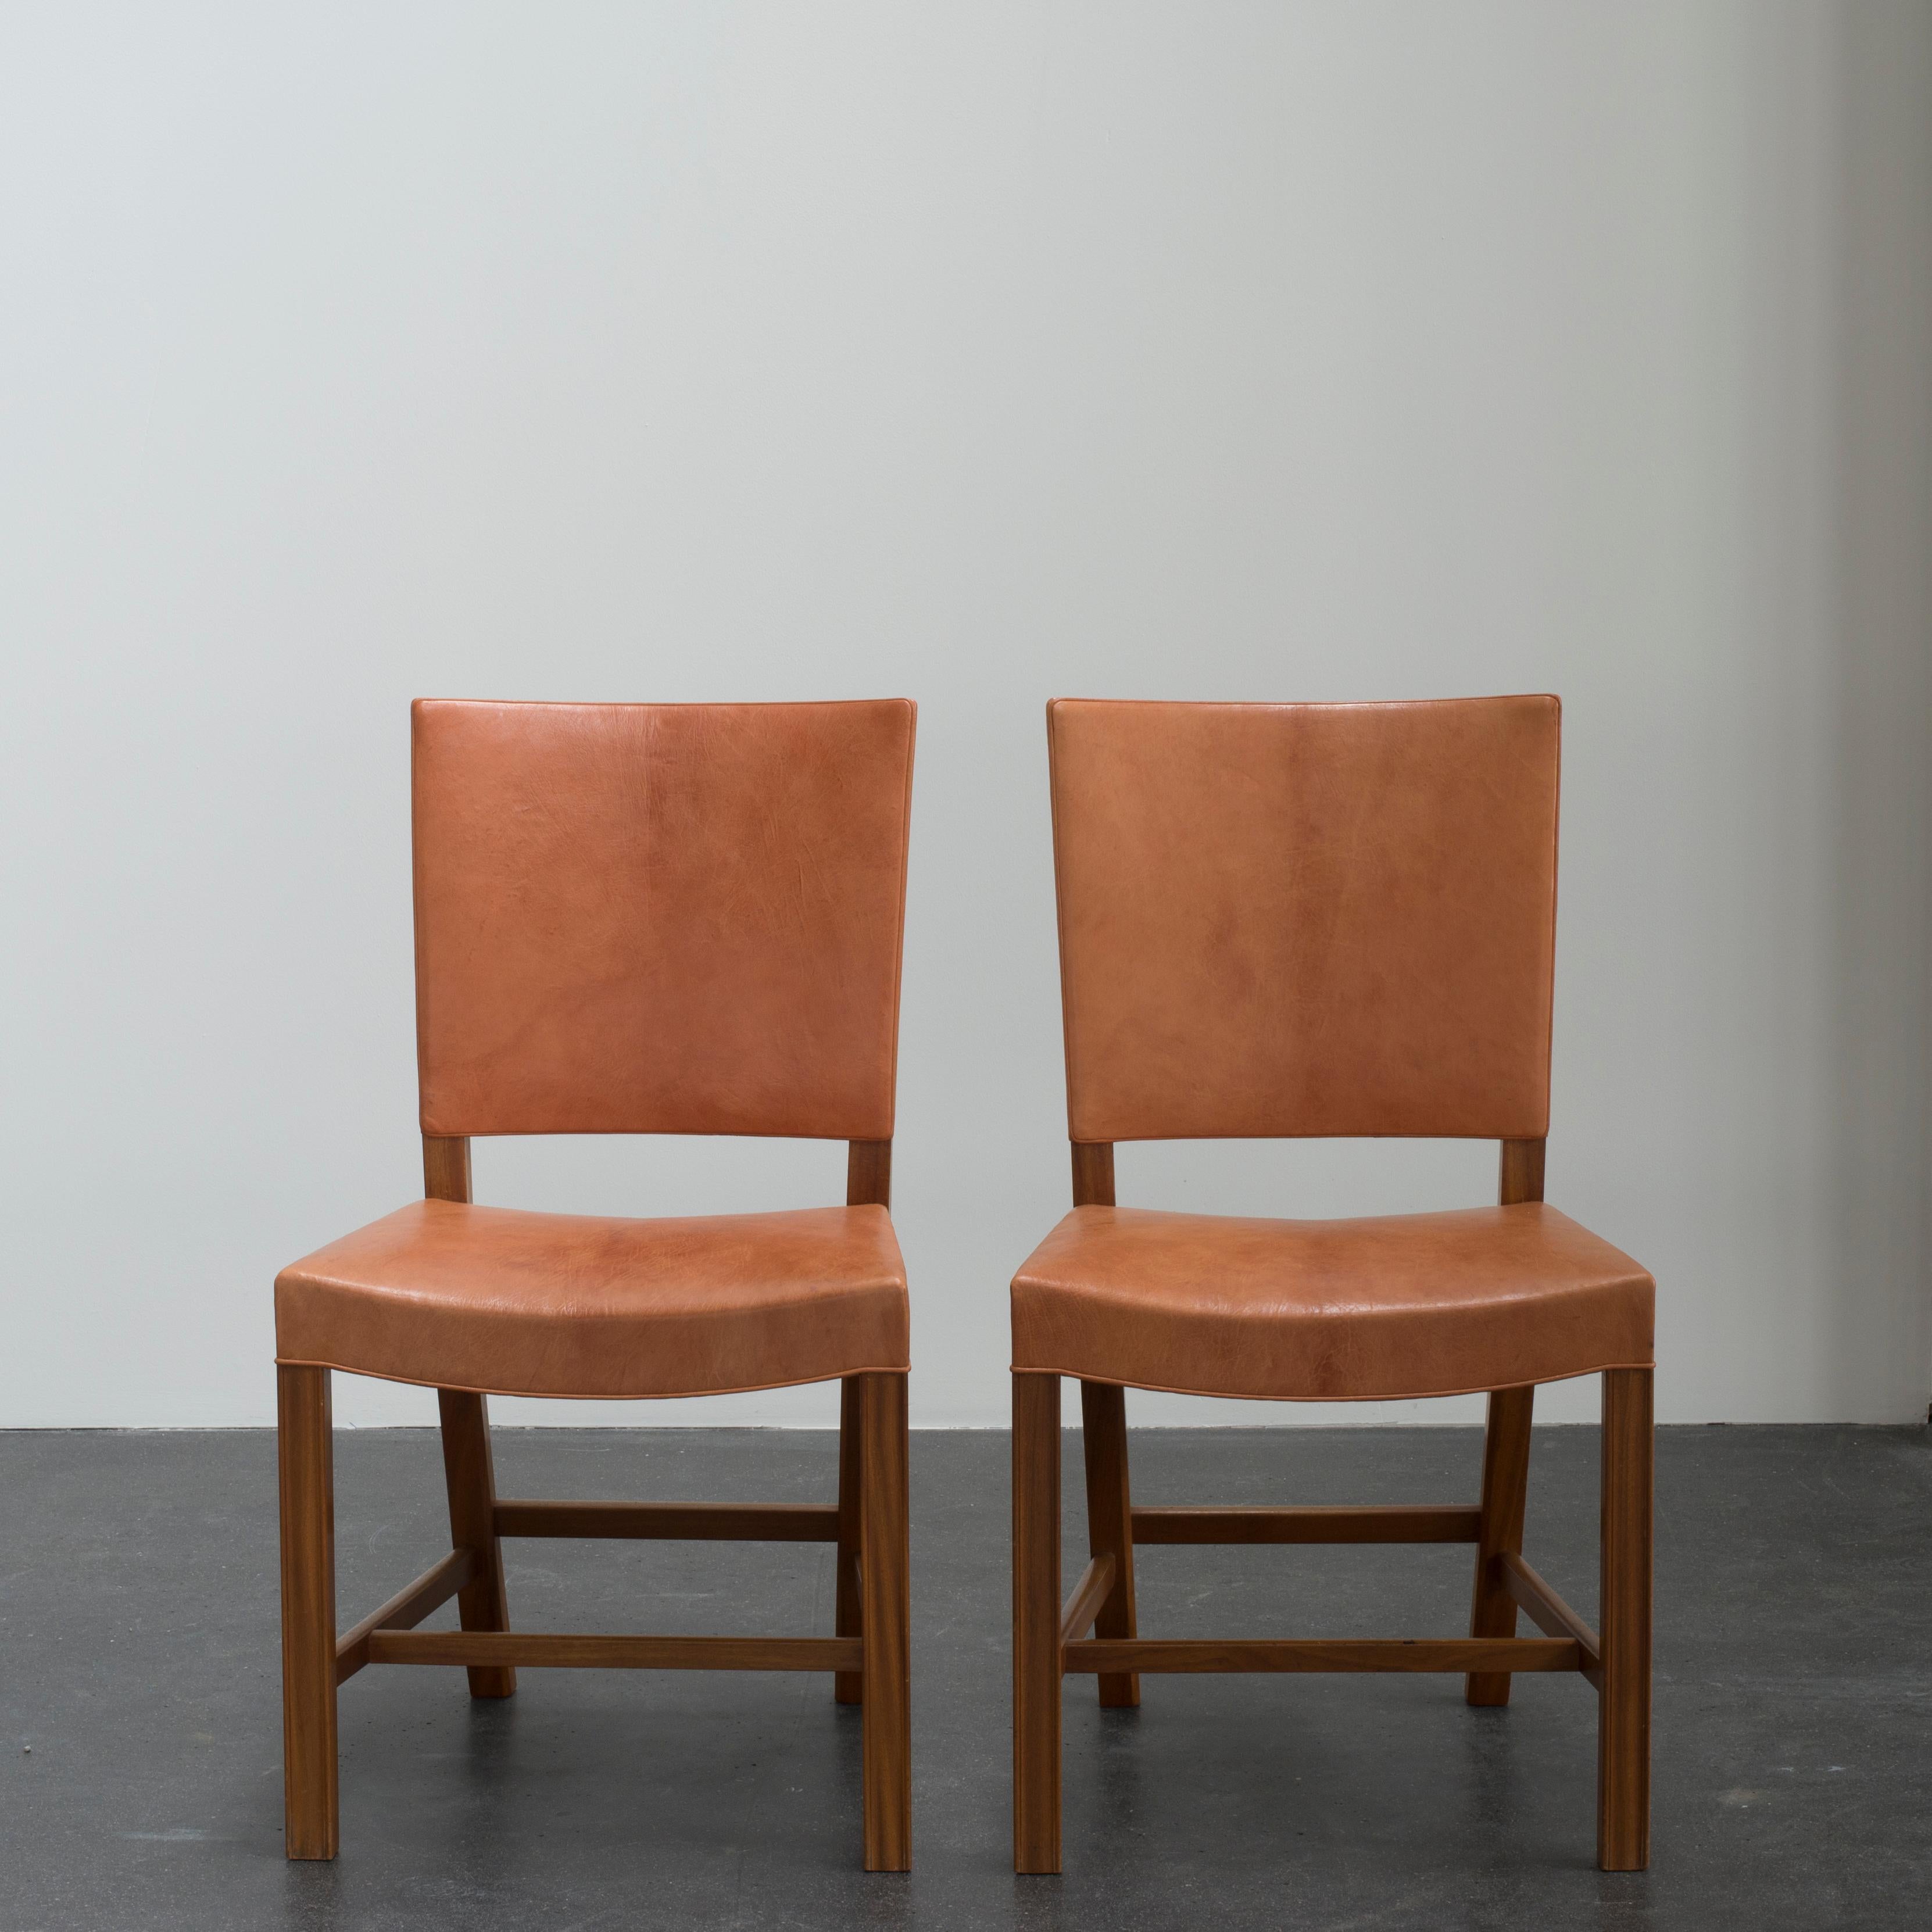 Leather Kaare Klint Set of Four Red Chairs for Rud. Rasmussen